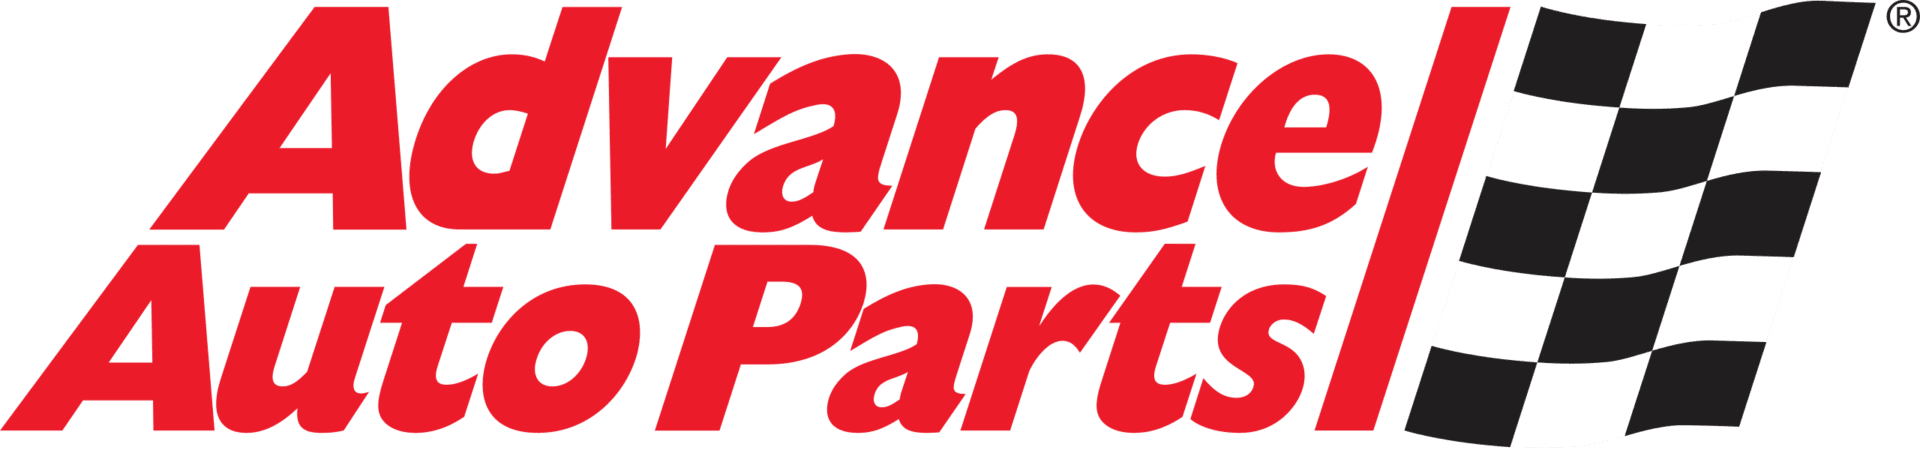 A green background with red lettering that says dance party.